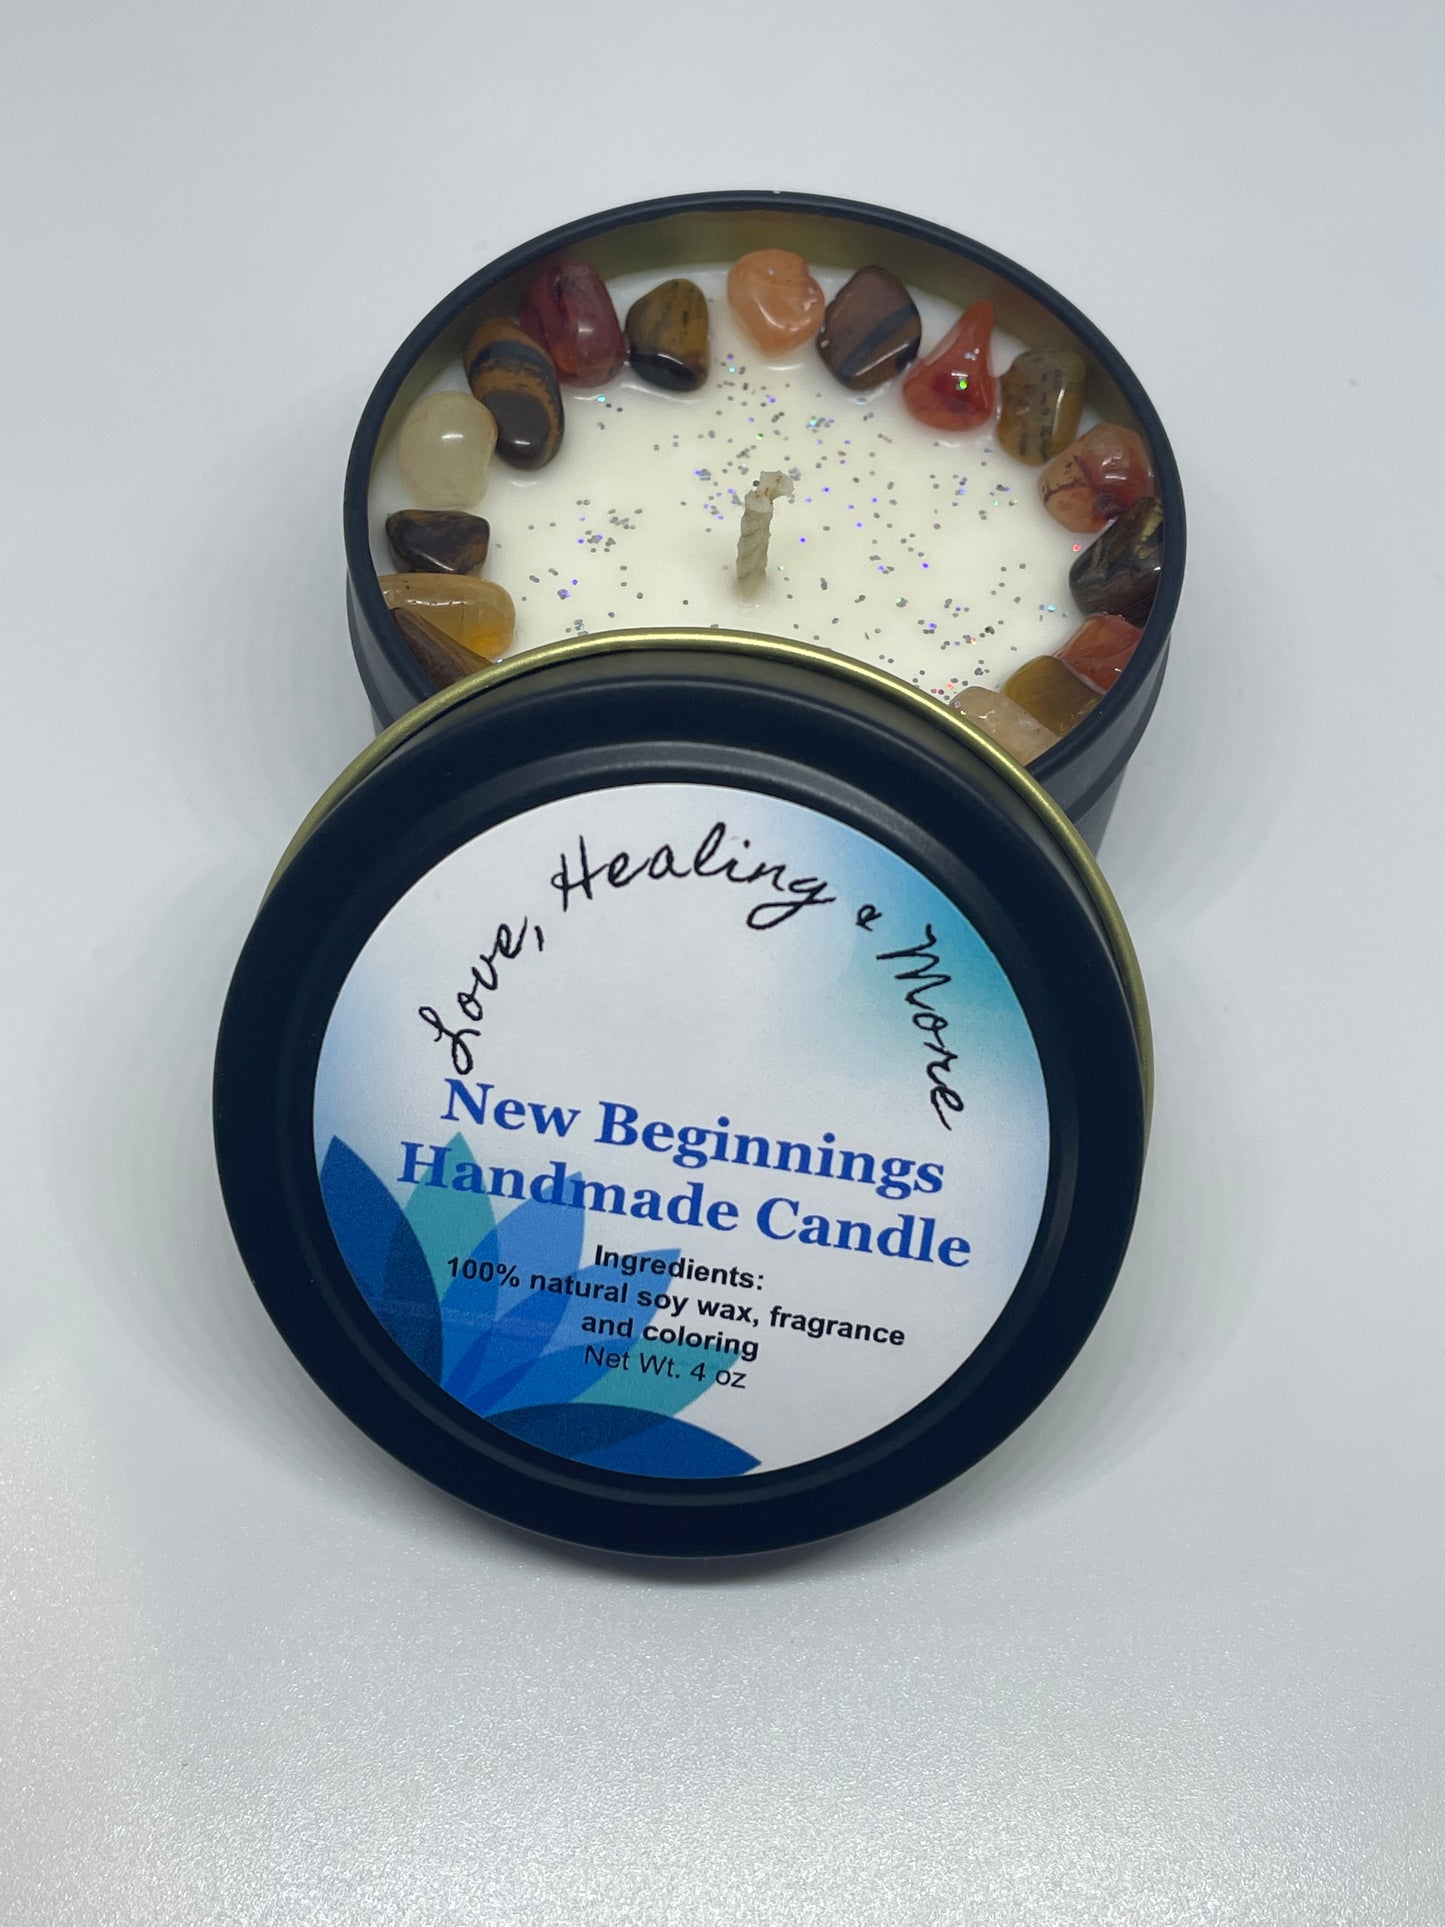 Handmade 4 oz. and 8 oz. Reiki Infused New Beginnings Fragrance Candle